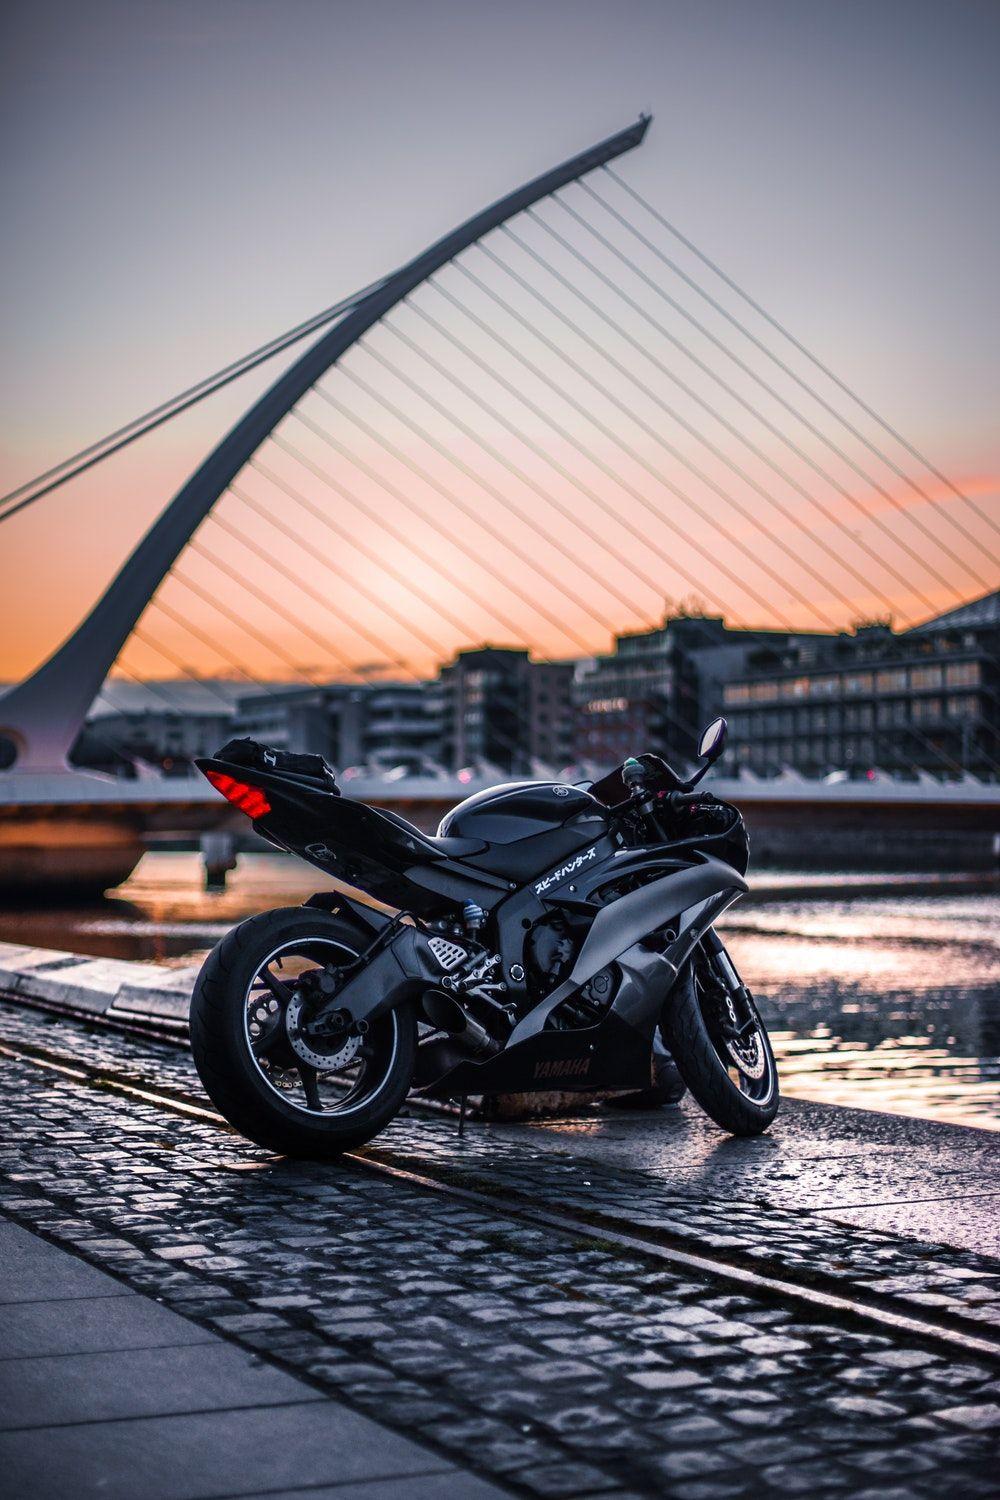 Motorbike Picture. Download Free Image & Stock